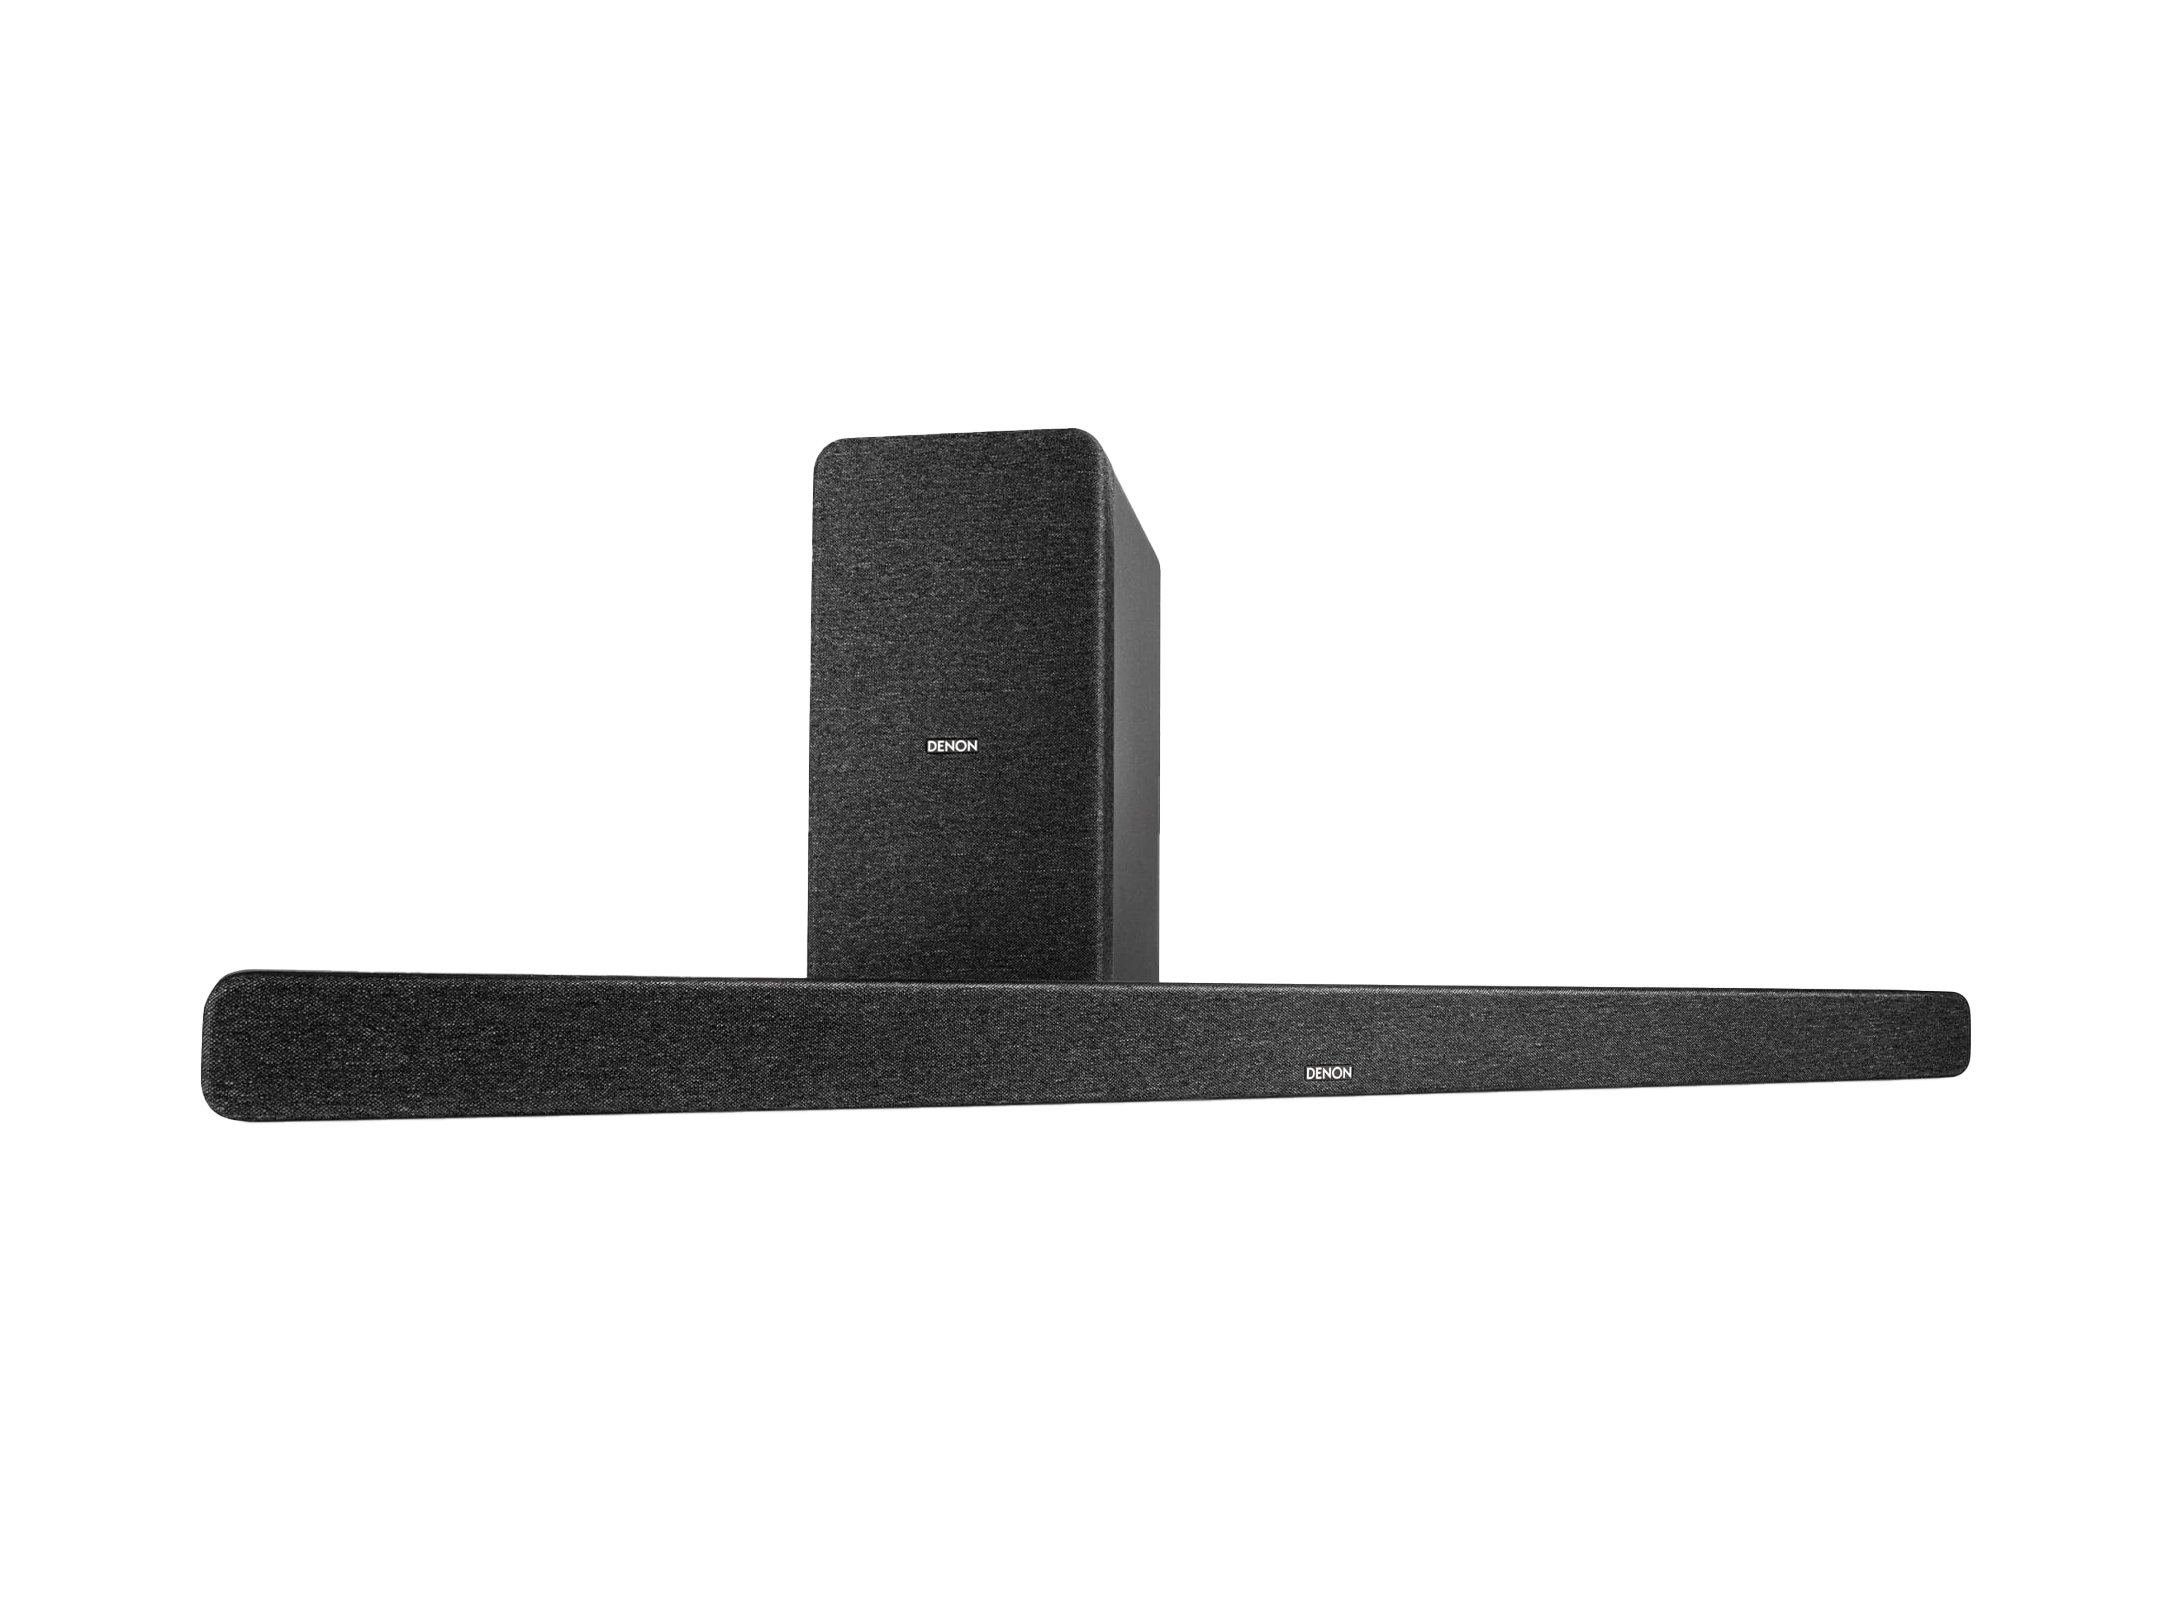 DHT-S517 - Sound Bar with Atmos Subwoofer | Denon - US